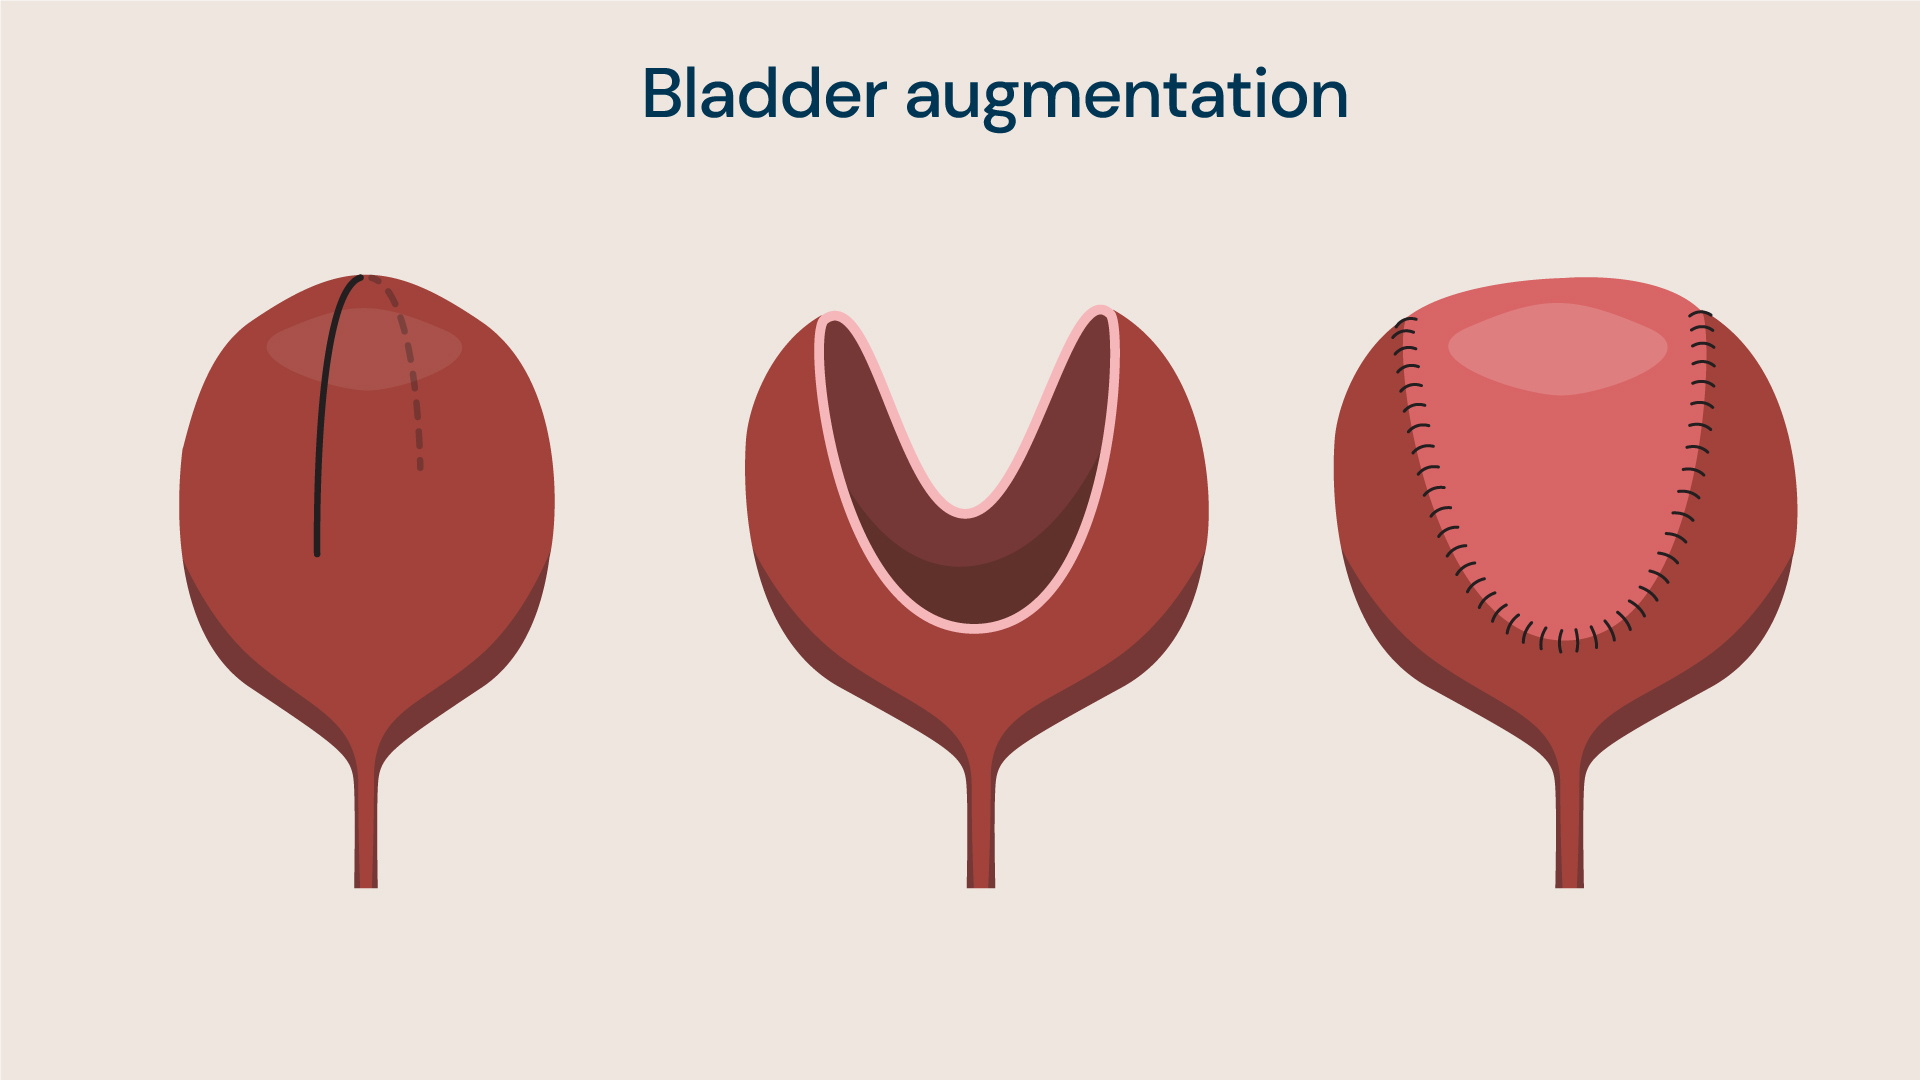 Bladder augmentation is a procedure to treat patients with a small bladder leading to high bladder pressure